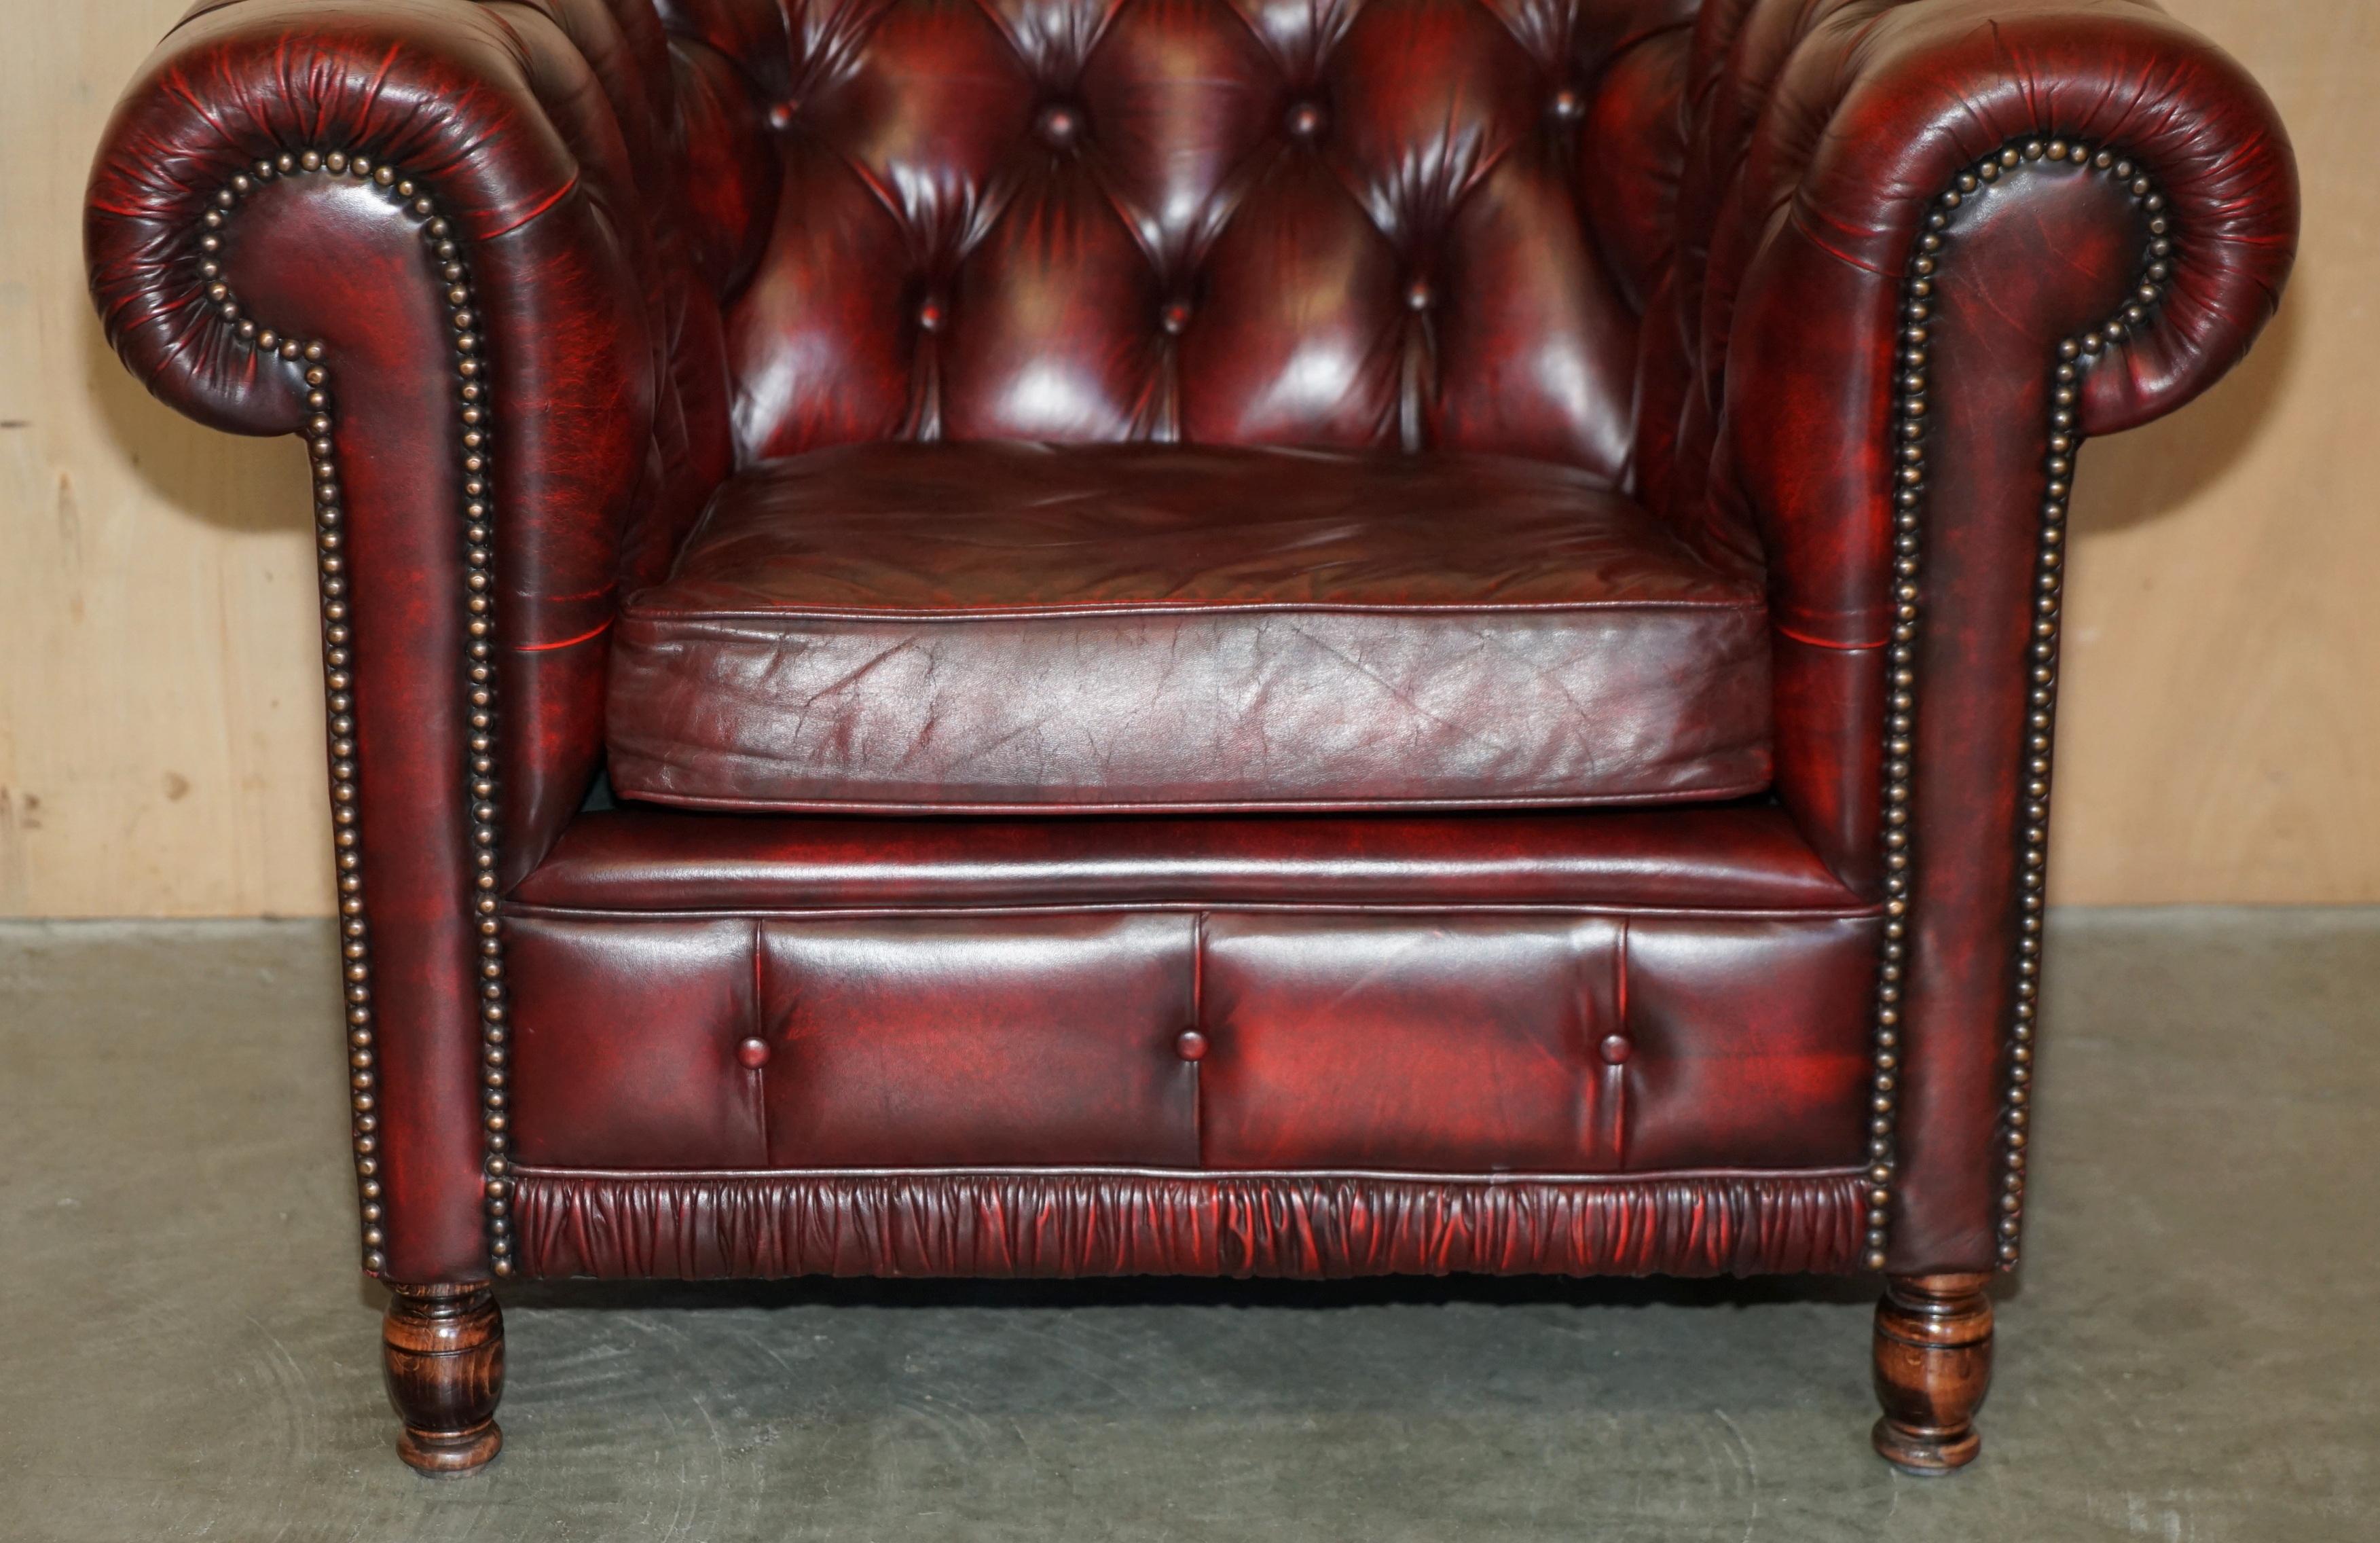 Leather PAIR OF ViNTAGE OXBLOOD LEATHER CHESTERFIELD CLUB ARMCHAIRS WITH ELEGANT LEGS